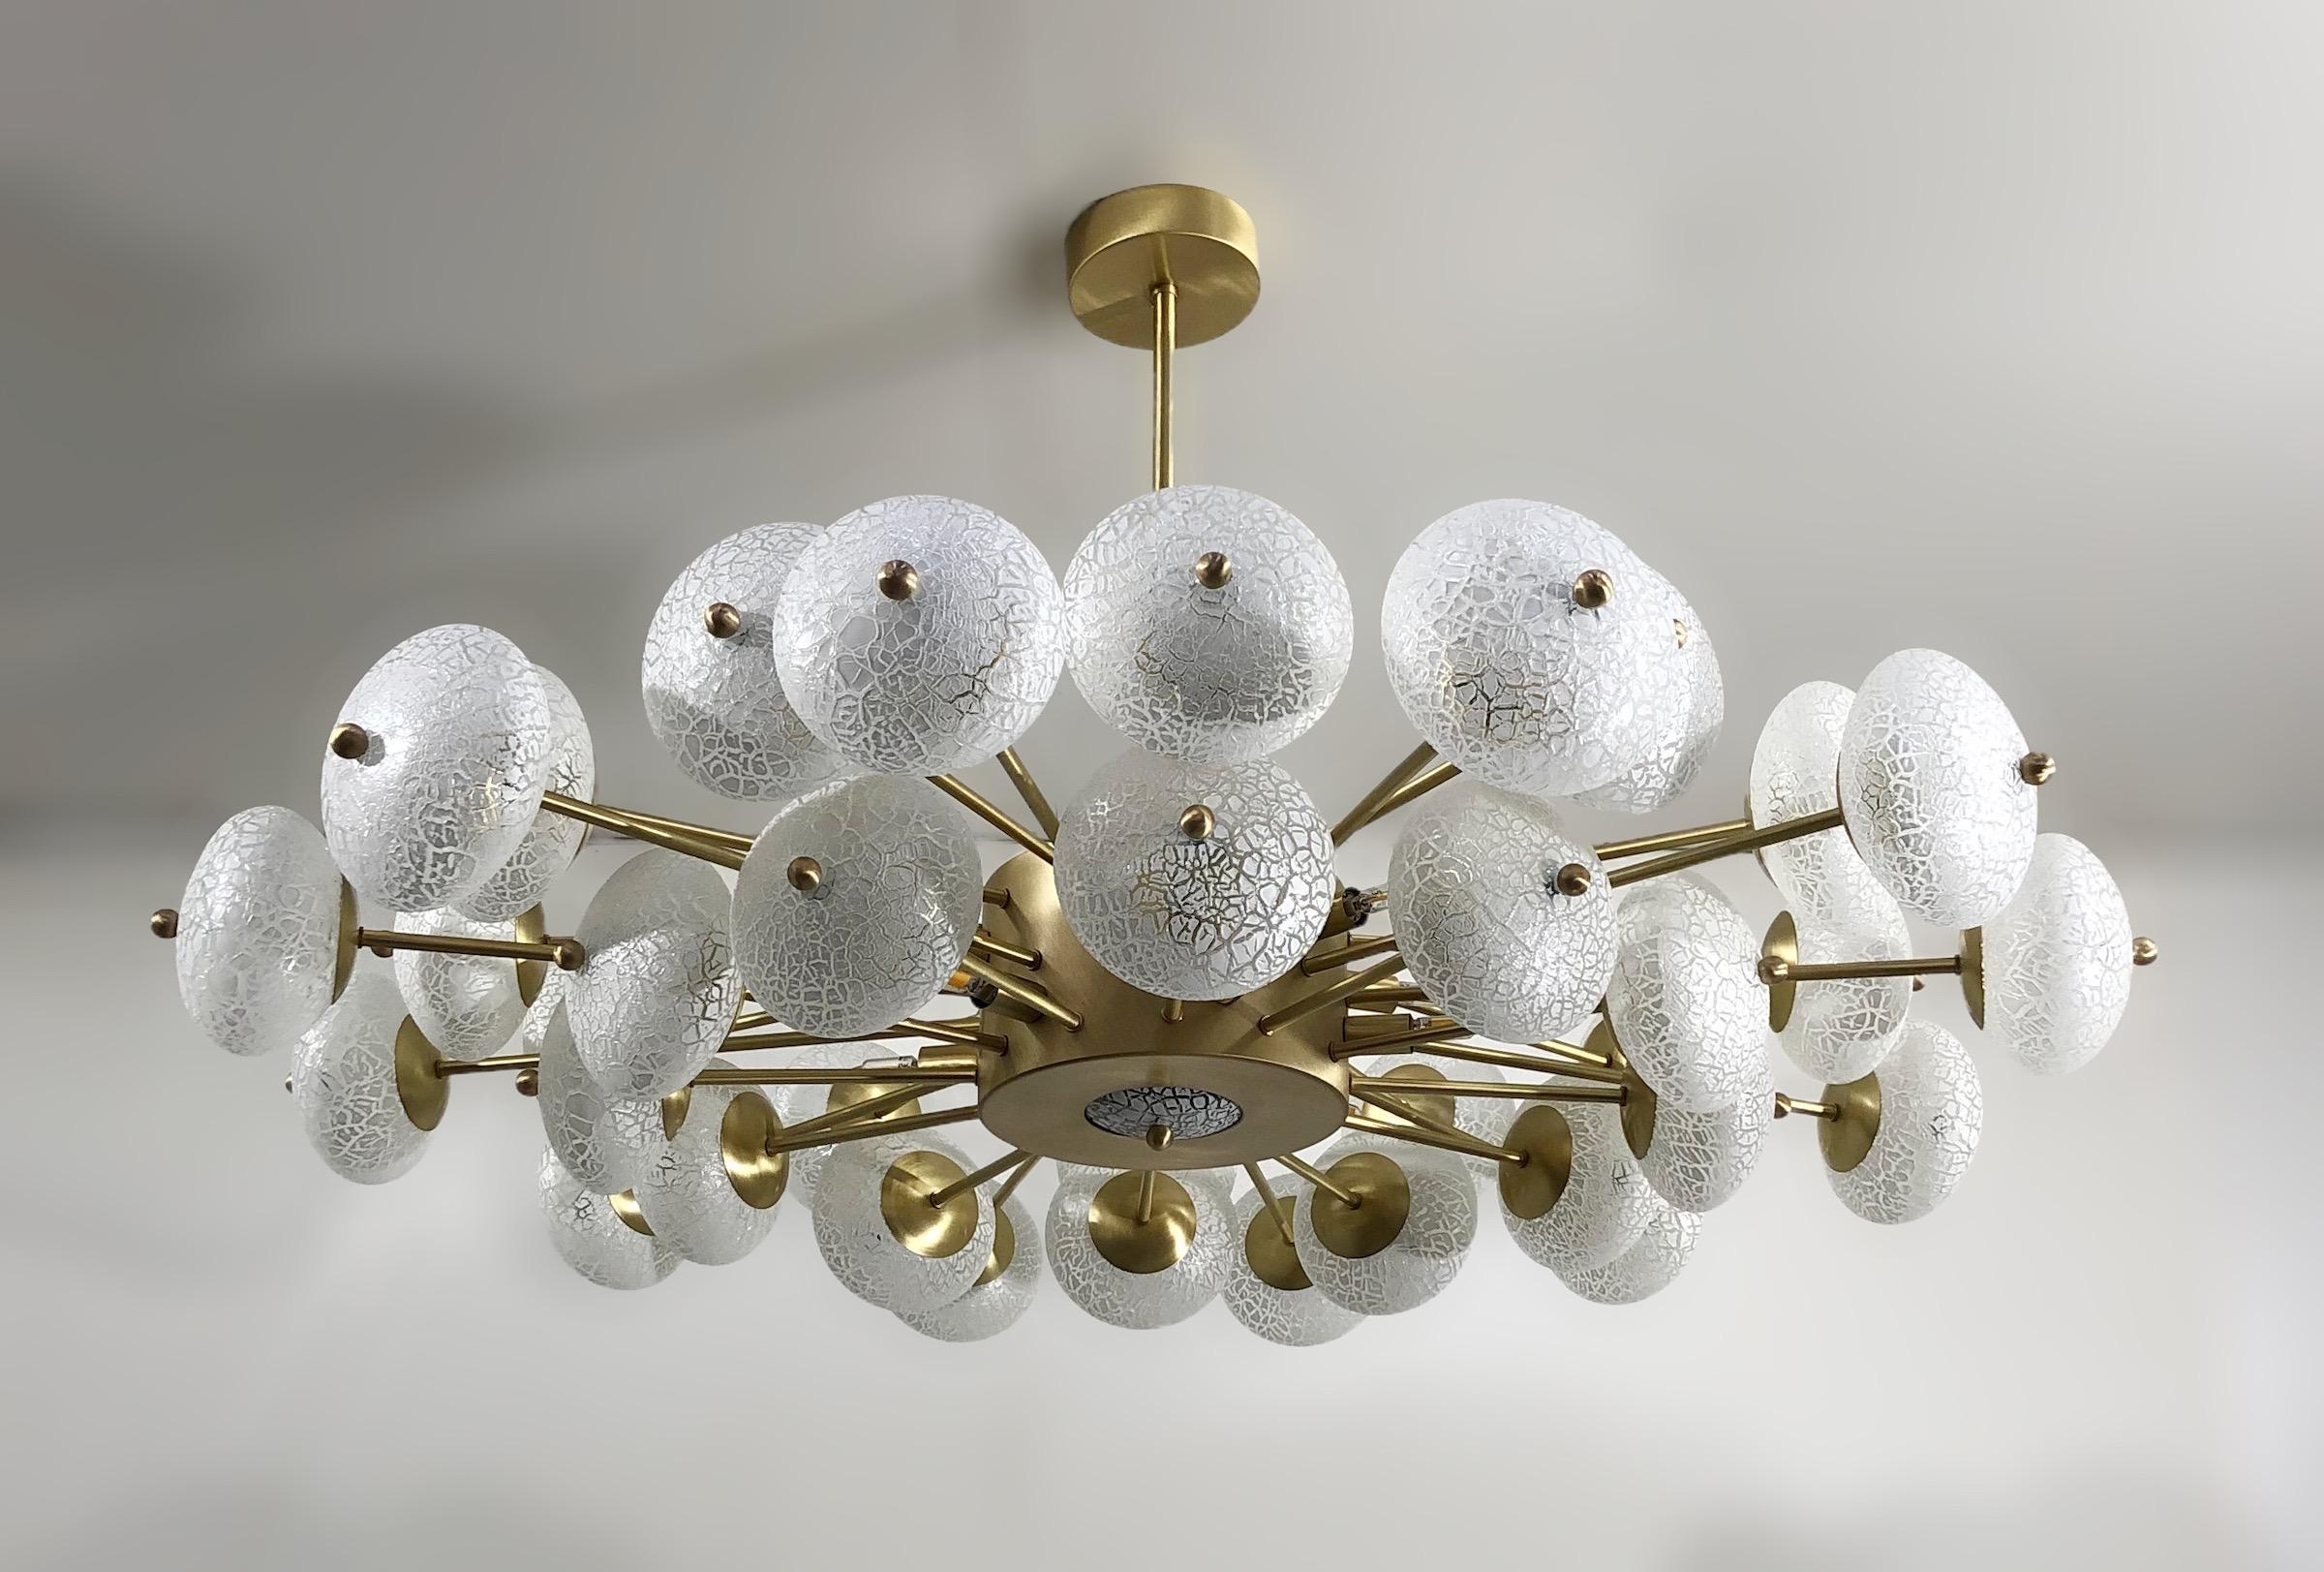 Limited edition Italian chandelier with crackled frosted white Murano glass orbs, mounted on satin brass finish frame / Designed by Fabio Bergomi for Fabio Ltd / Made in Italy
12 lights / G9 type / max 40W each
Measures: diameter 49 inches, height